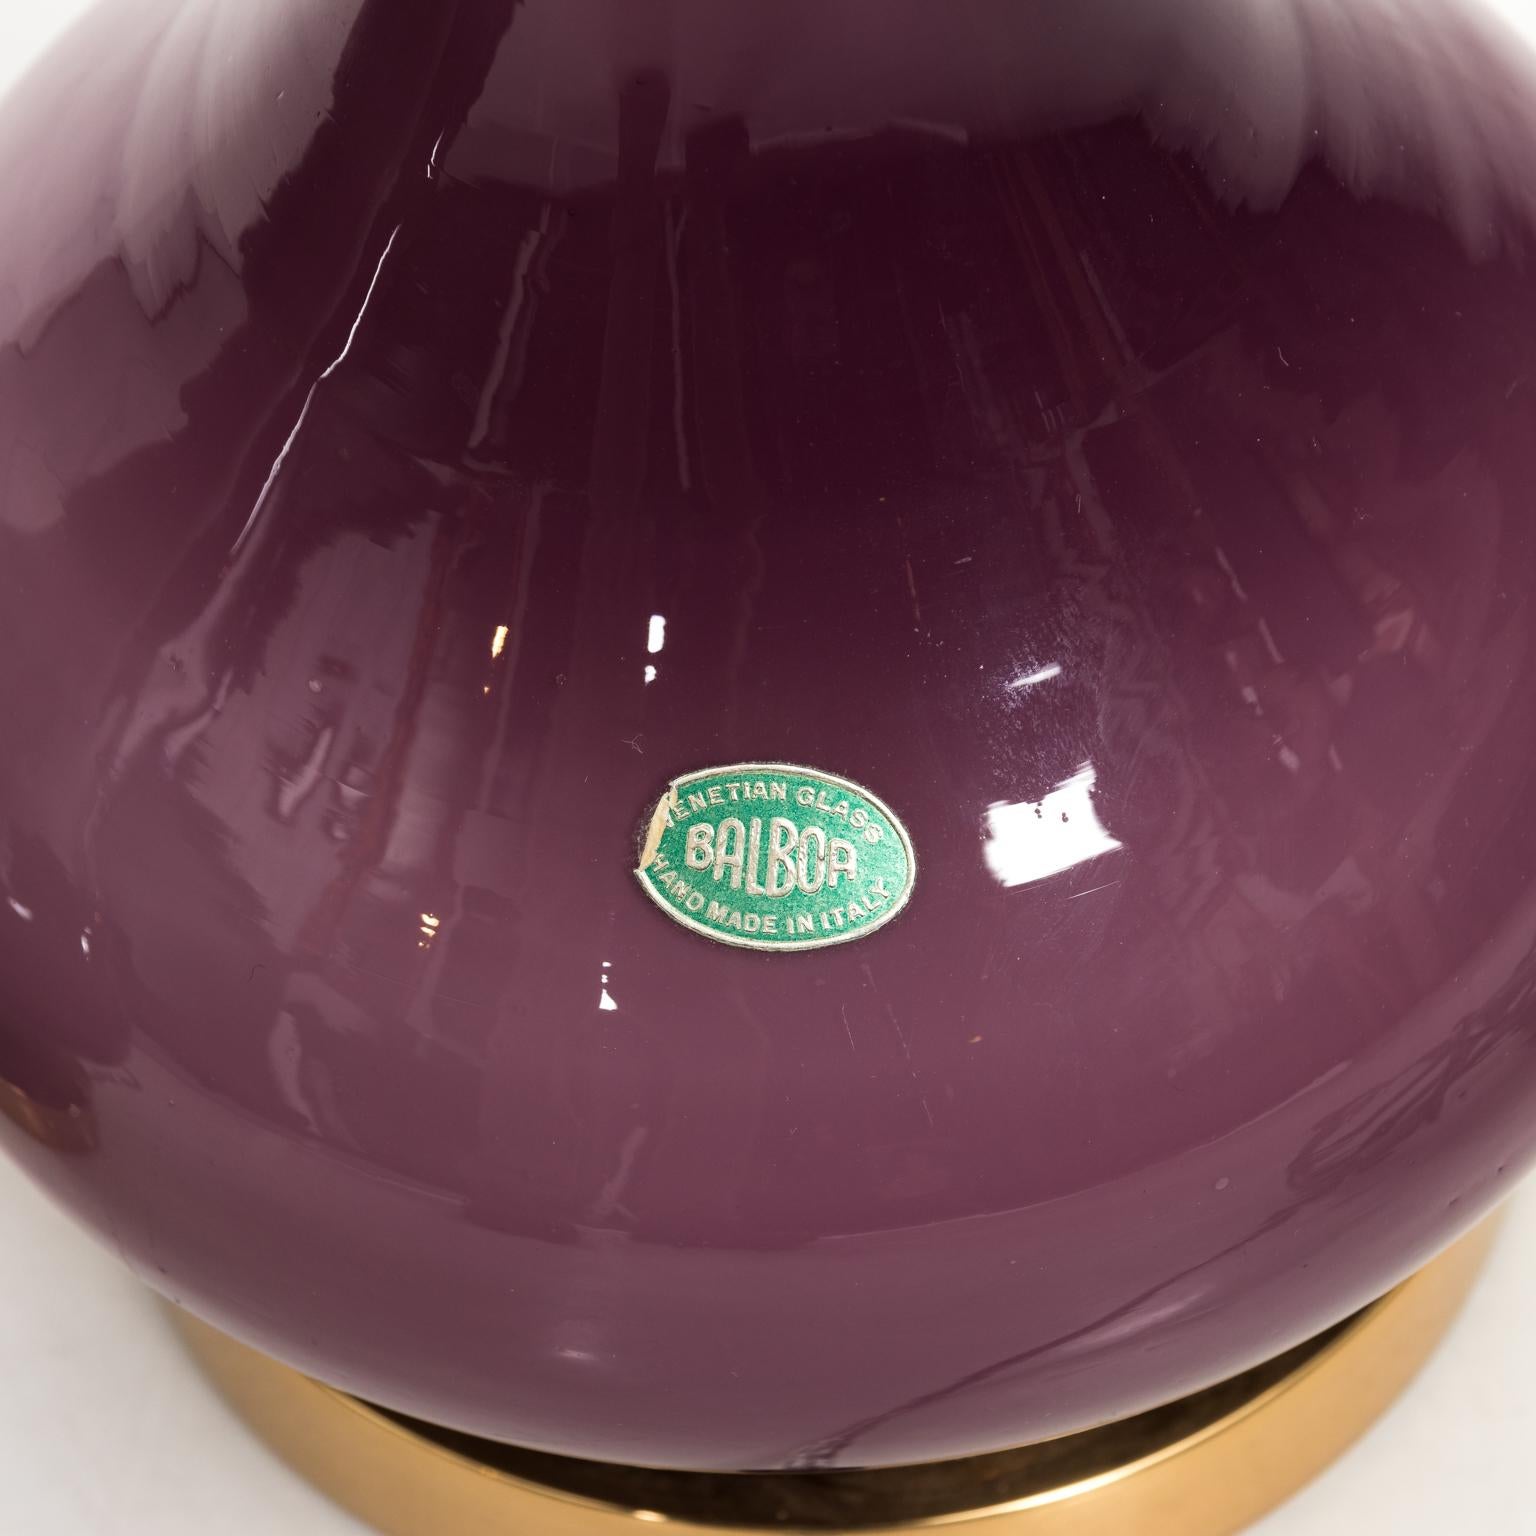 Pair of Aubergine Murano glass lamps. Shades not included, circa mid-20th century.